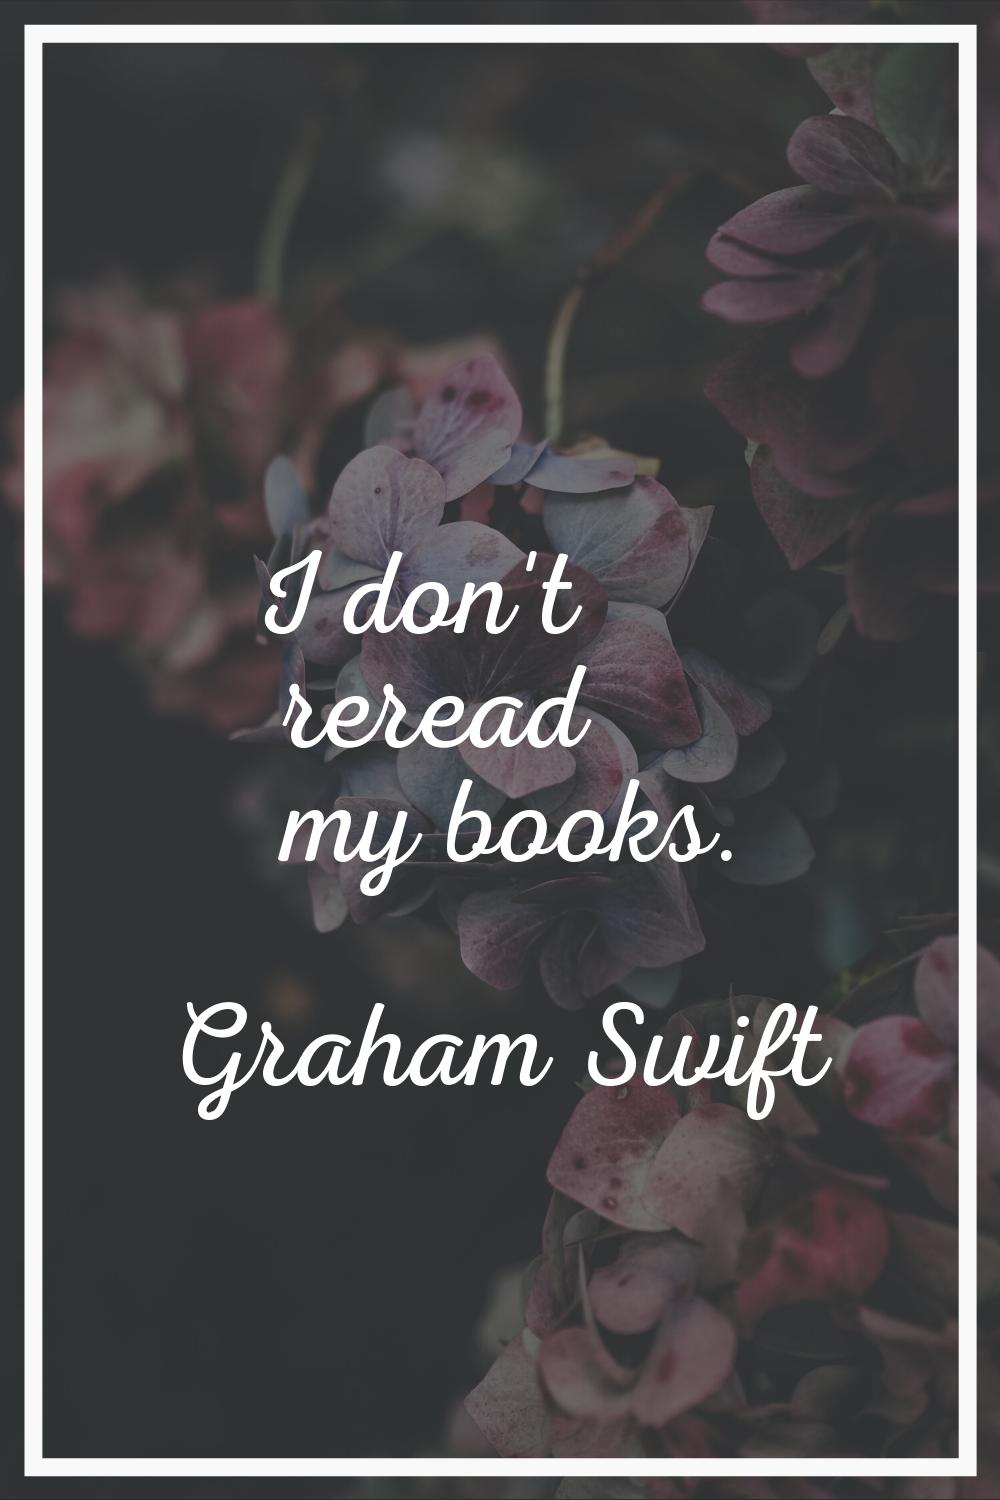 I don't reread my books.